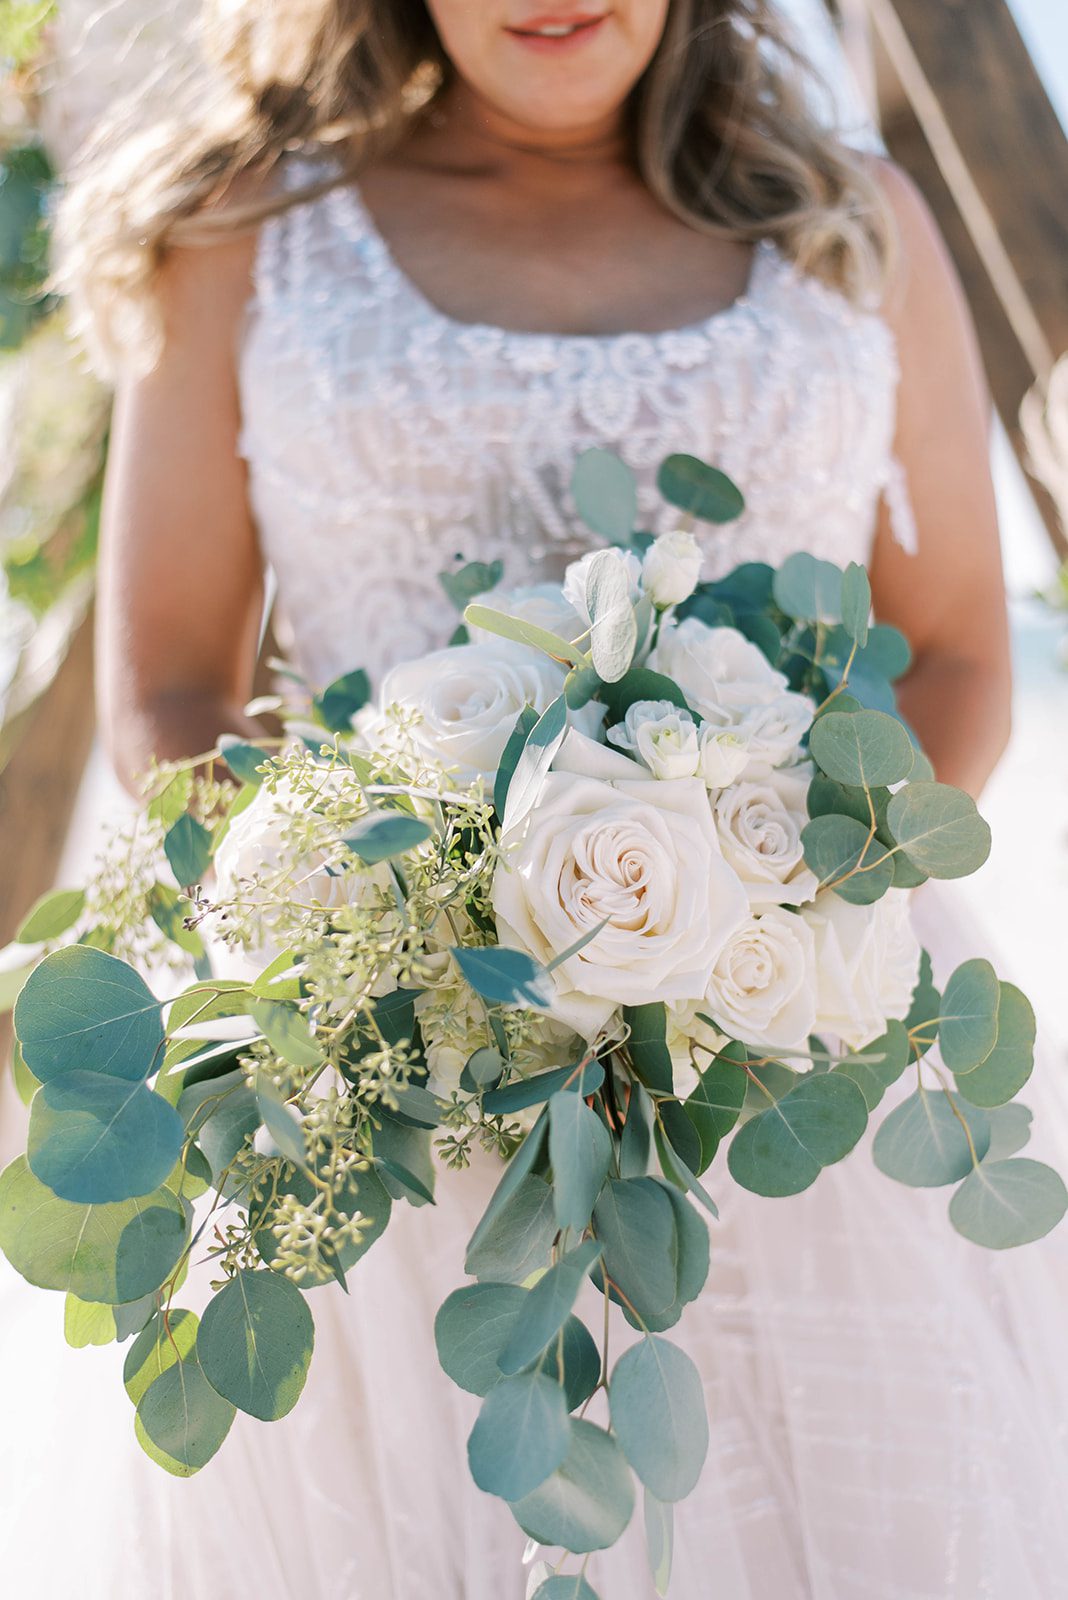 bride holding her wedding bouquet for her Florida beach wedding with the bouquet having white roses and eucalyptus